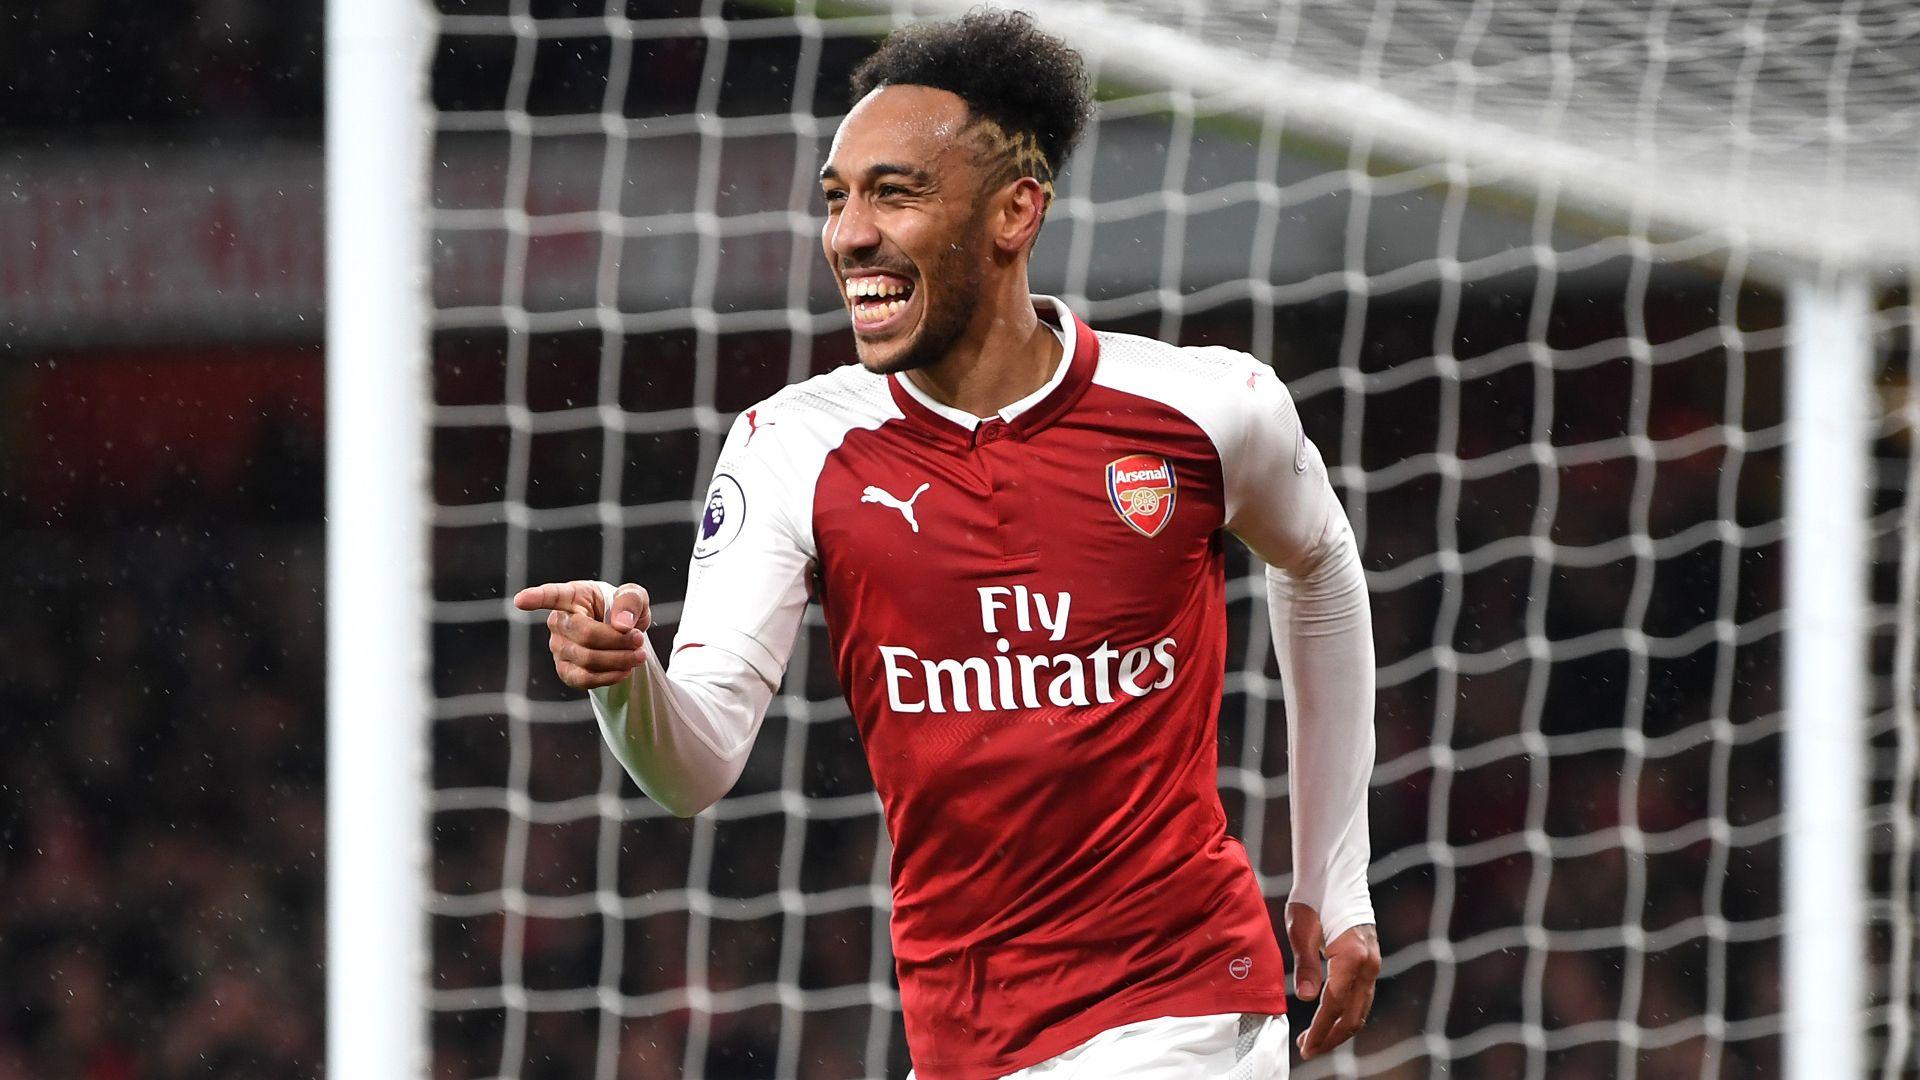 Could Pierre Emerick Aubameyang Really Take Arsenal To The Next